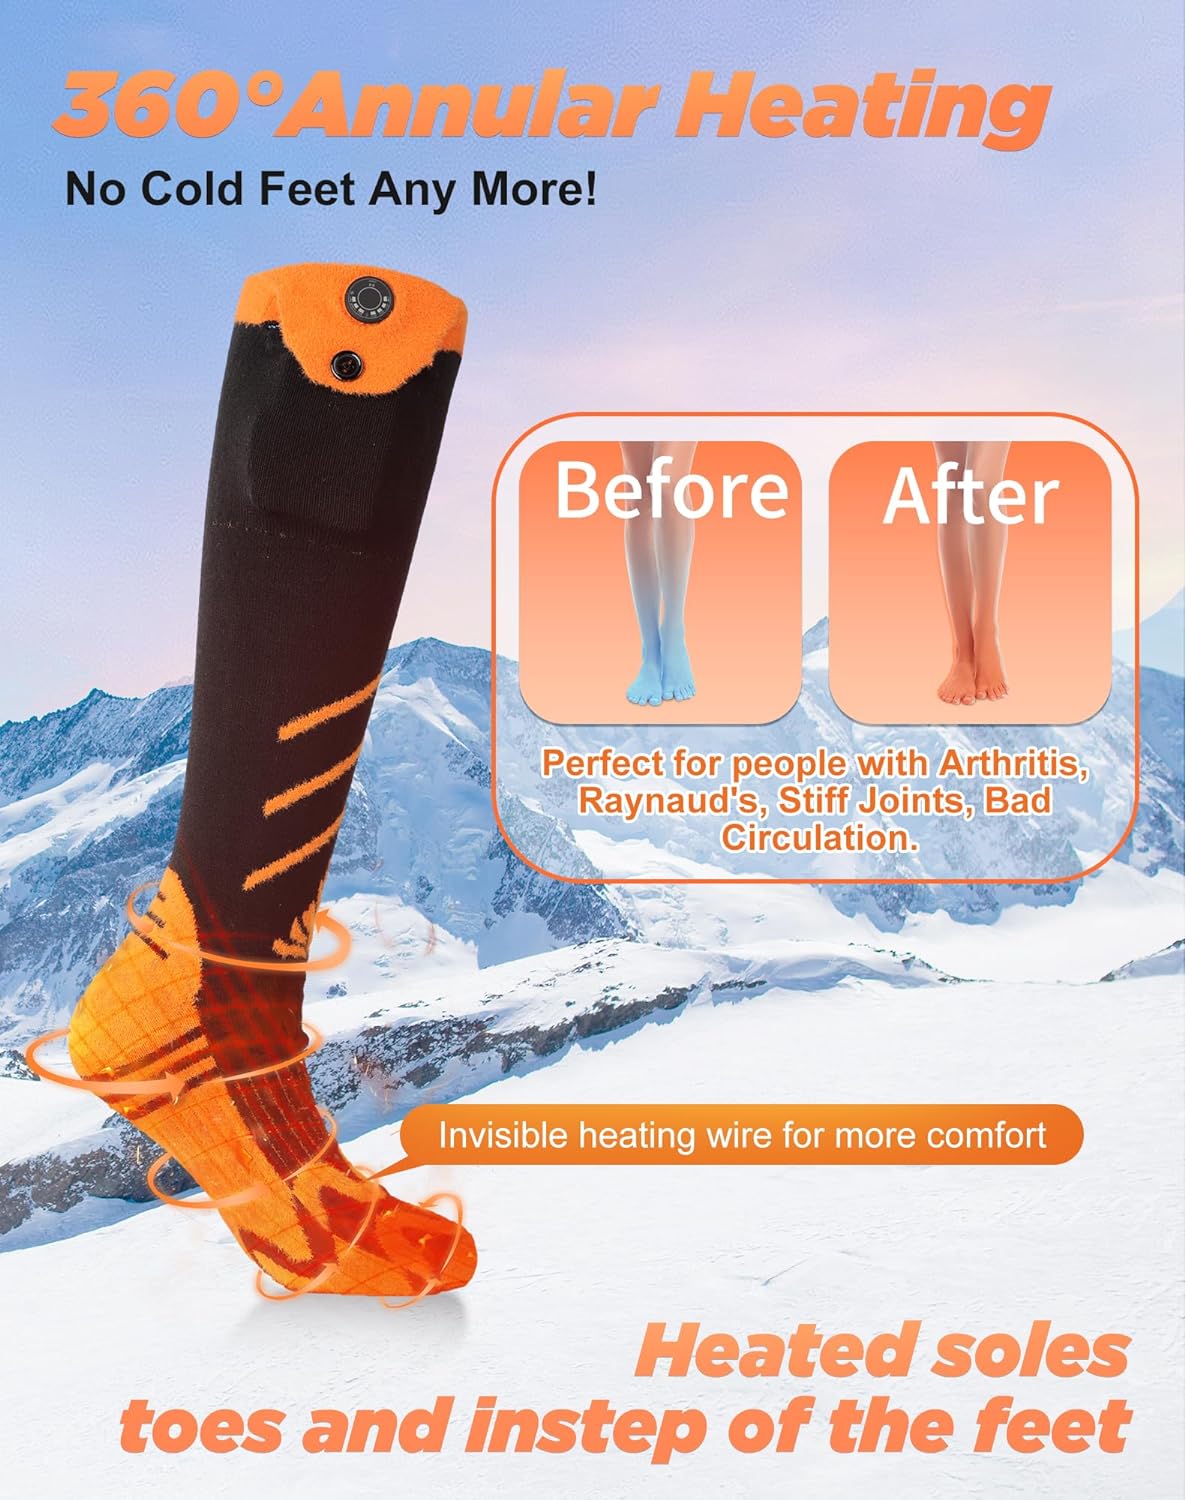 COFIT Electric Heated Socks Rechargeable, Men Women Thermal Foot Warmer Washable Stockings Smart App Control 7.4V 2500mAh Battery Powered Socks for Winter Hunting Skiing Ice Fishing Camping Hiking